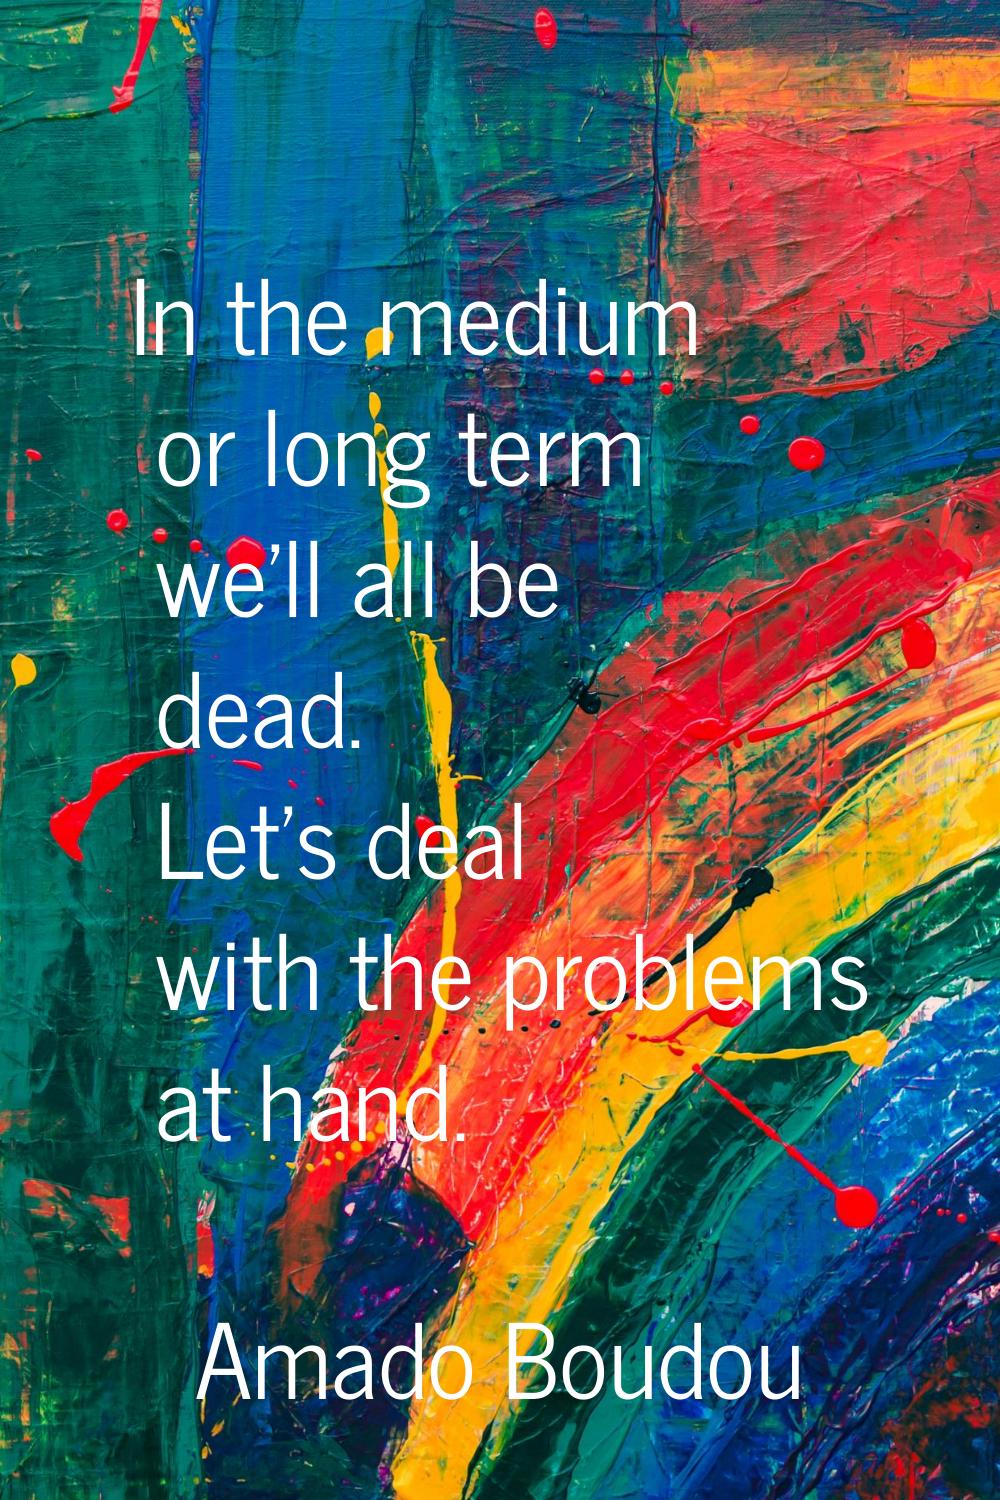 In the medium or long term we'll all be dead. Let's deal with the problems at hand.